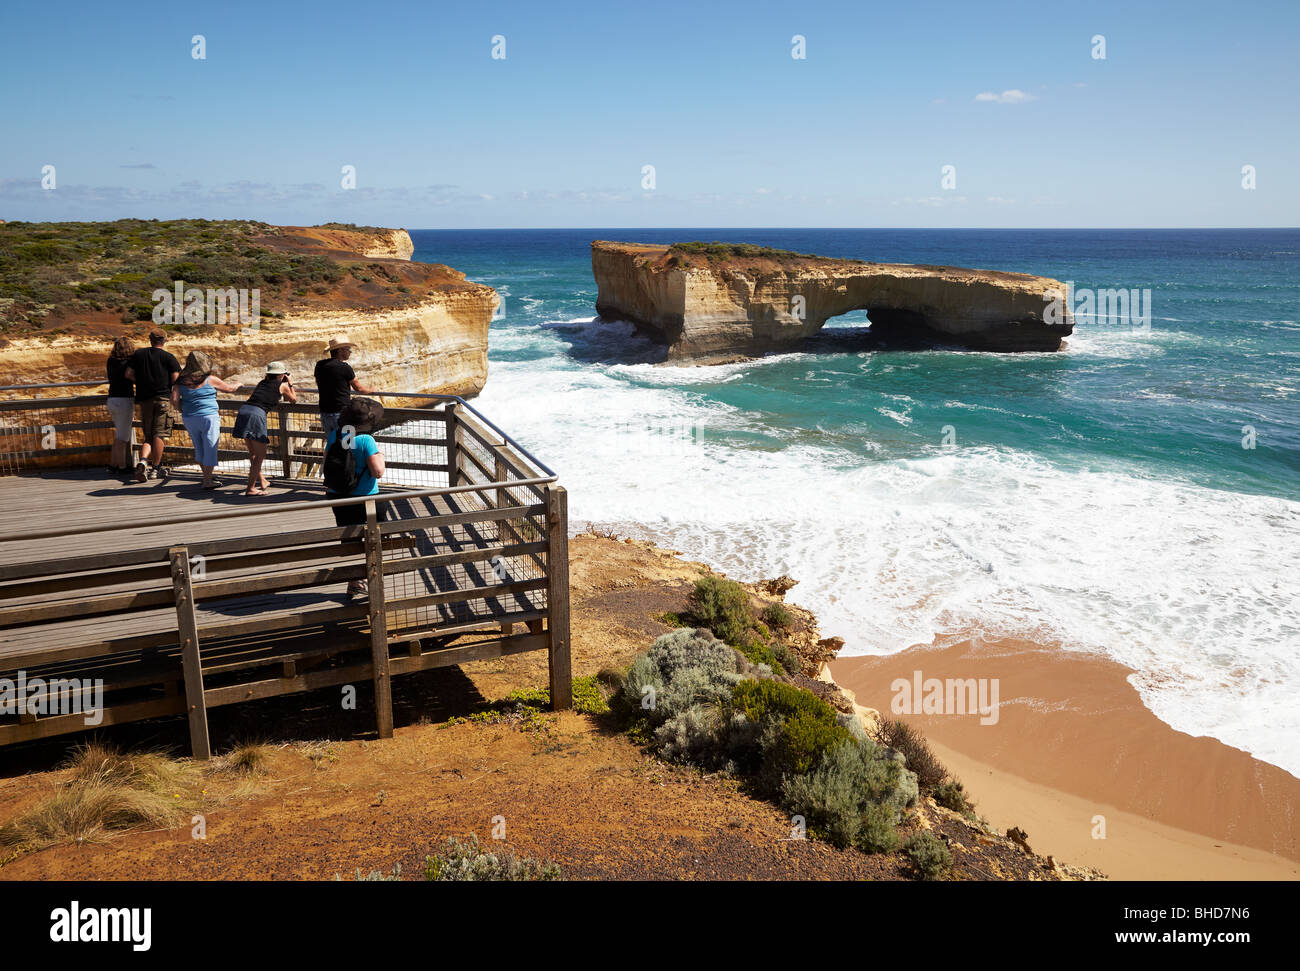 Tourists at one of the viewing platforms, London Bridge, Port Campbell National Park, Great Ocean Road, Victoria, Australia Stock Photo